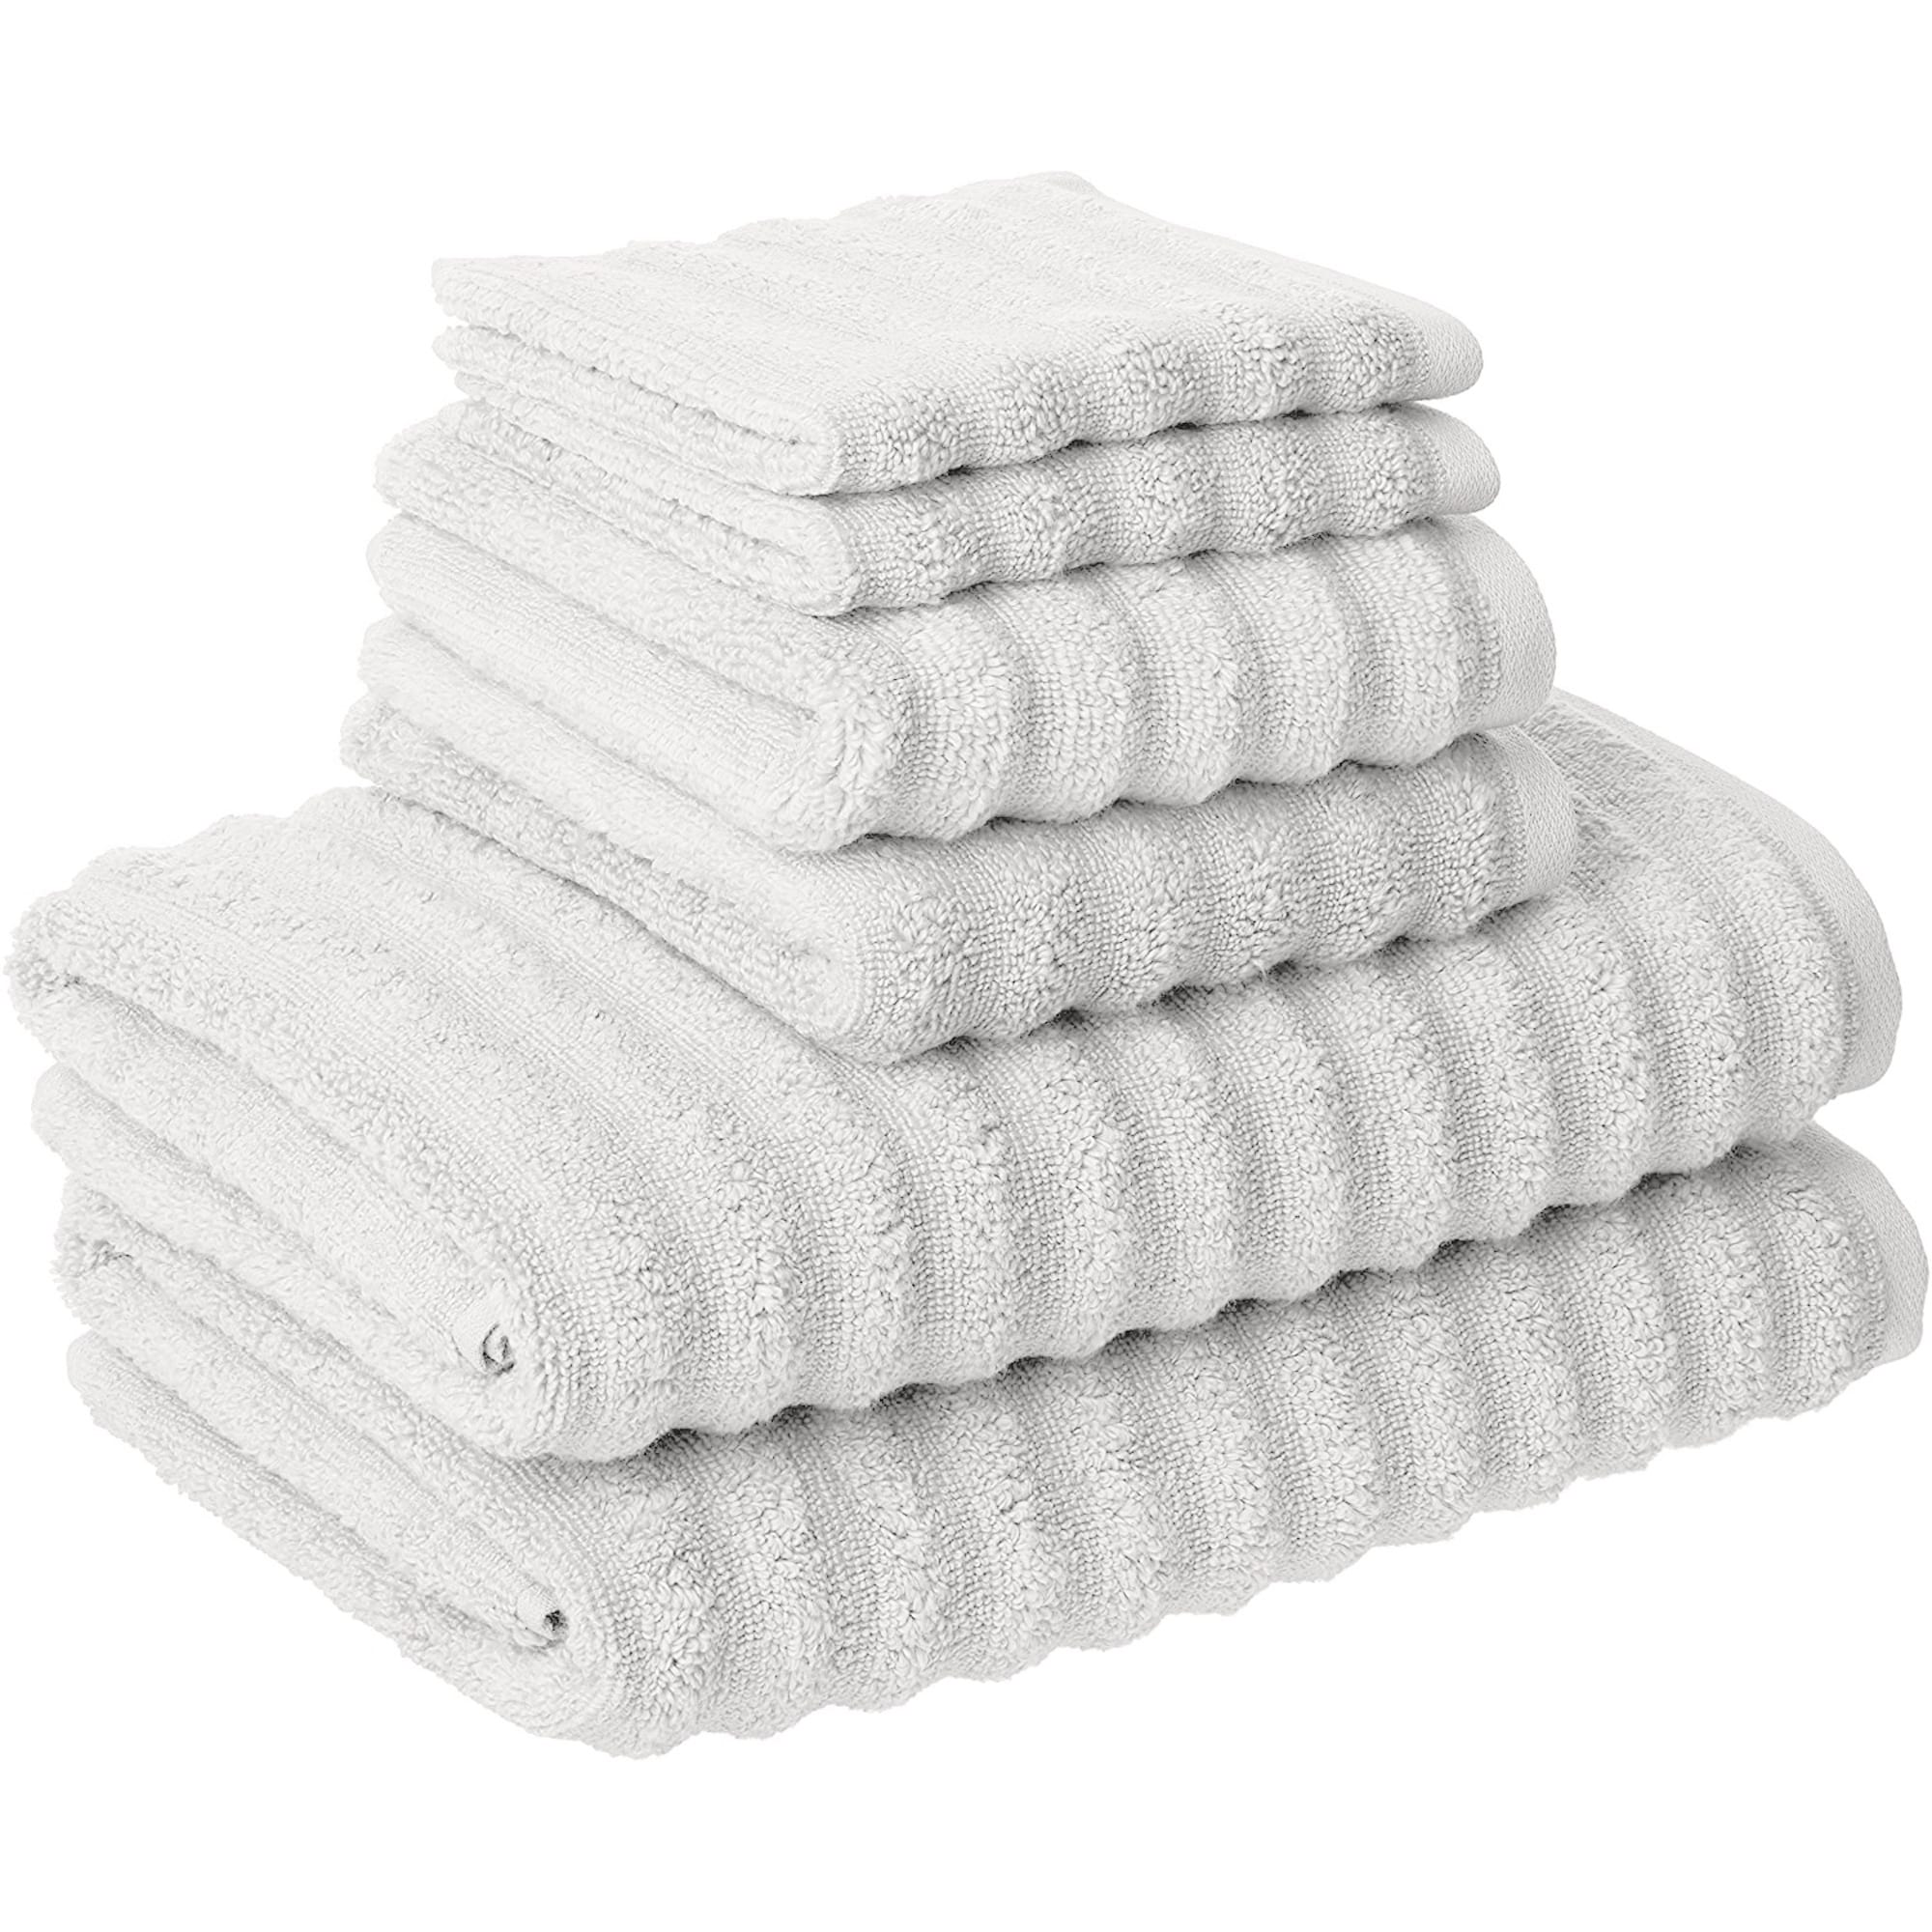 Clearance！Large Bath Towels,Stripe Series Washcloth - Quick Dry Absorbent  Everyday Luxury Hotel Spa Gym Pool Shower Cotton Bathroom Towel Set,9 X 16